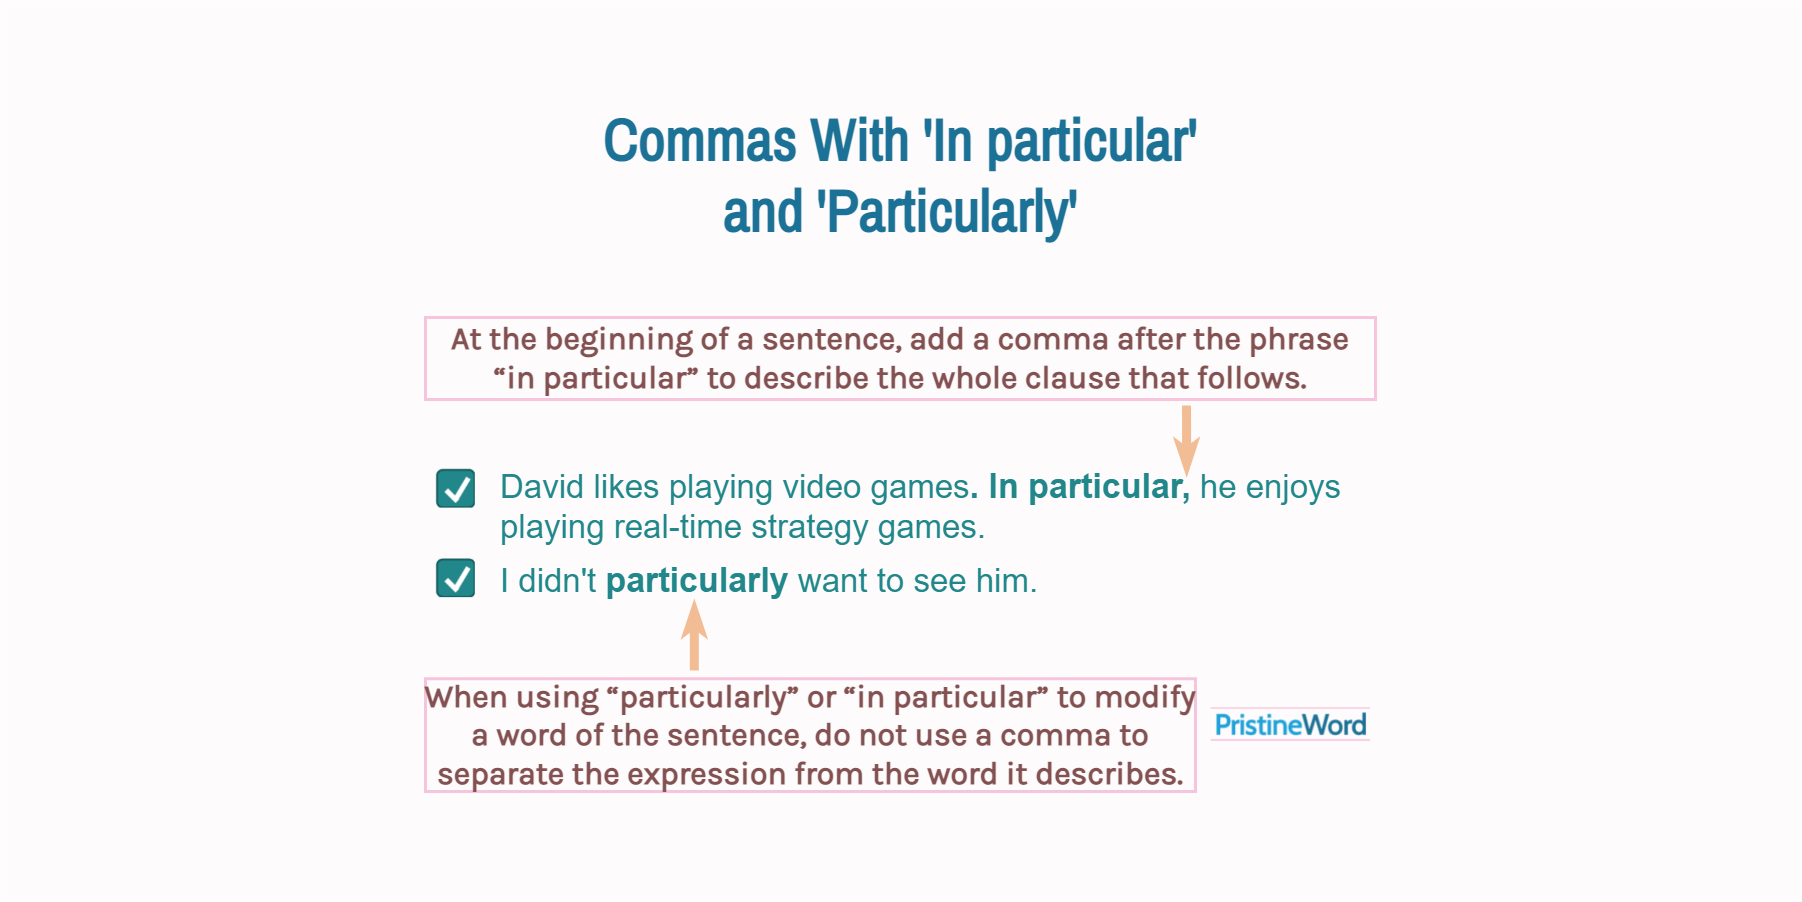 Commas With 'In particular' and 'Particularly'